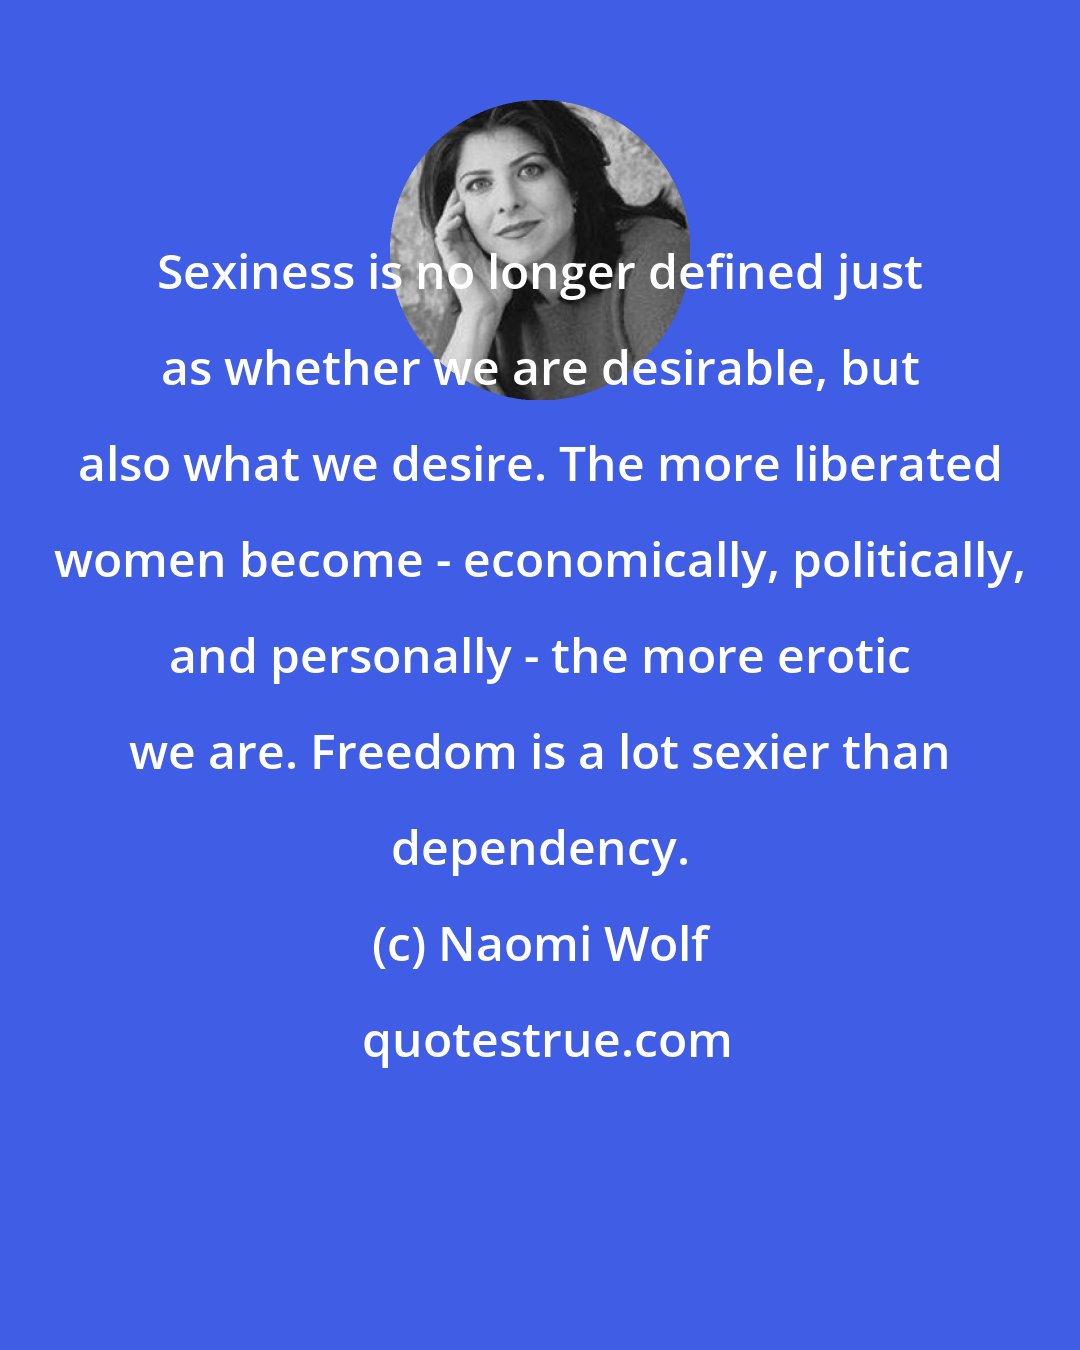 Naomi Wolf: Sexiness is no longer defined just as whether we are desirable, but also what we desire. The more liberated women become - economically, politically, and personally - the more erotic we are. Freedom is a lot sexier than dependency.